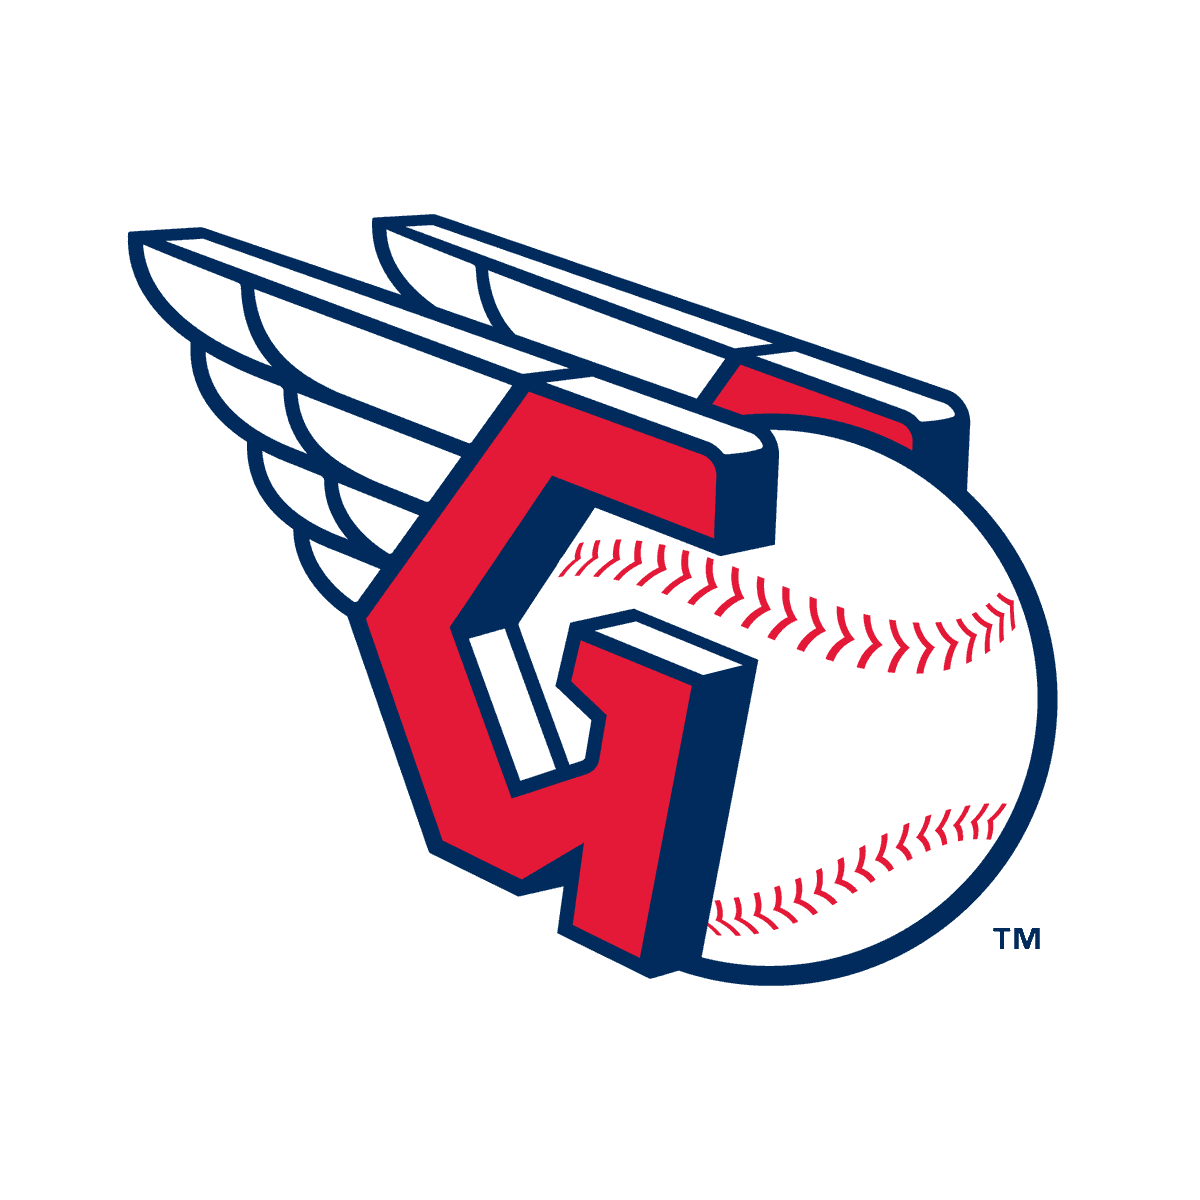 The Cleveland Guardians play the Minnesota Twins again today! Tune in at 6:35pm for pregame and at 7:15 to hear the game. https://t.co/XaDFpaSYaM